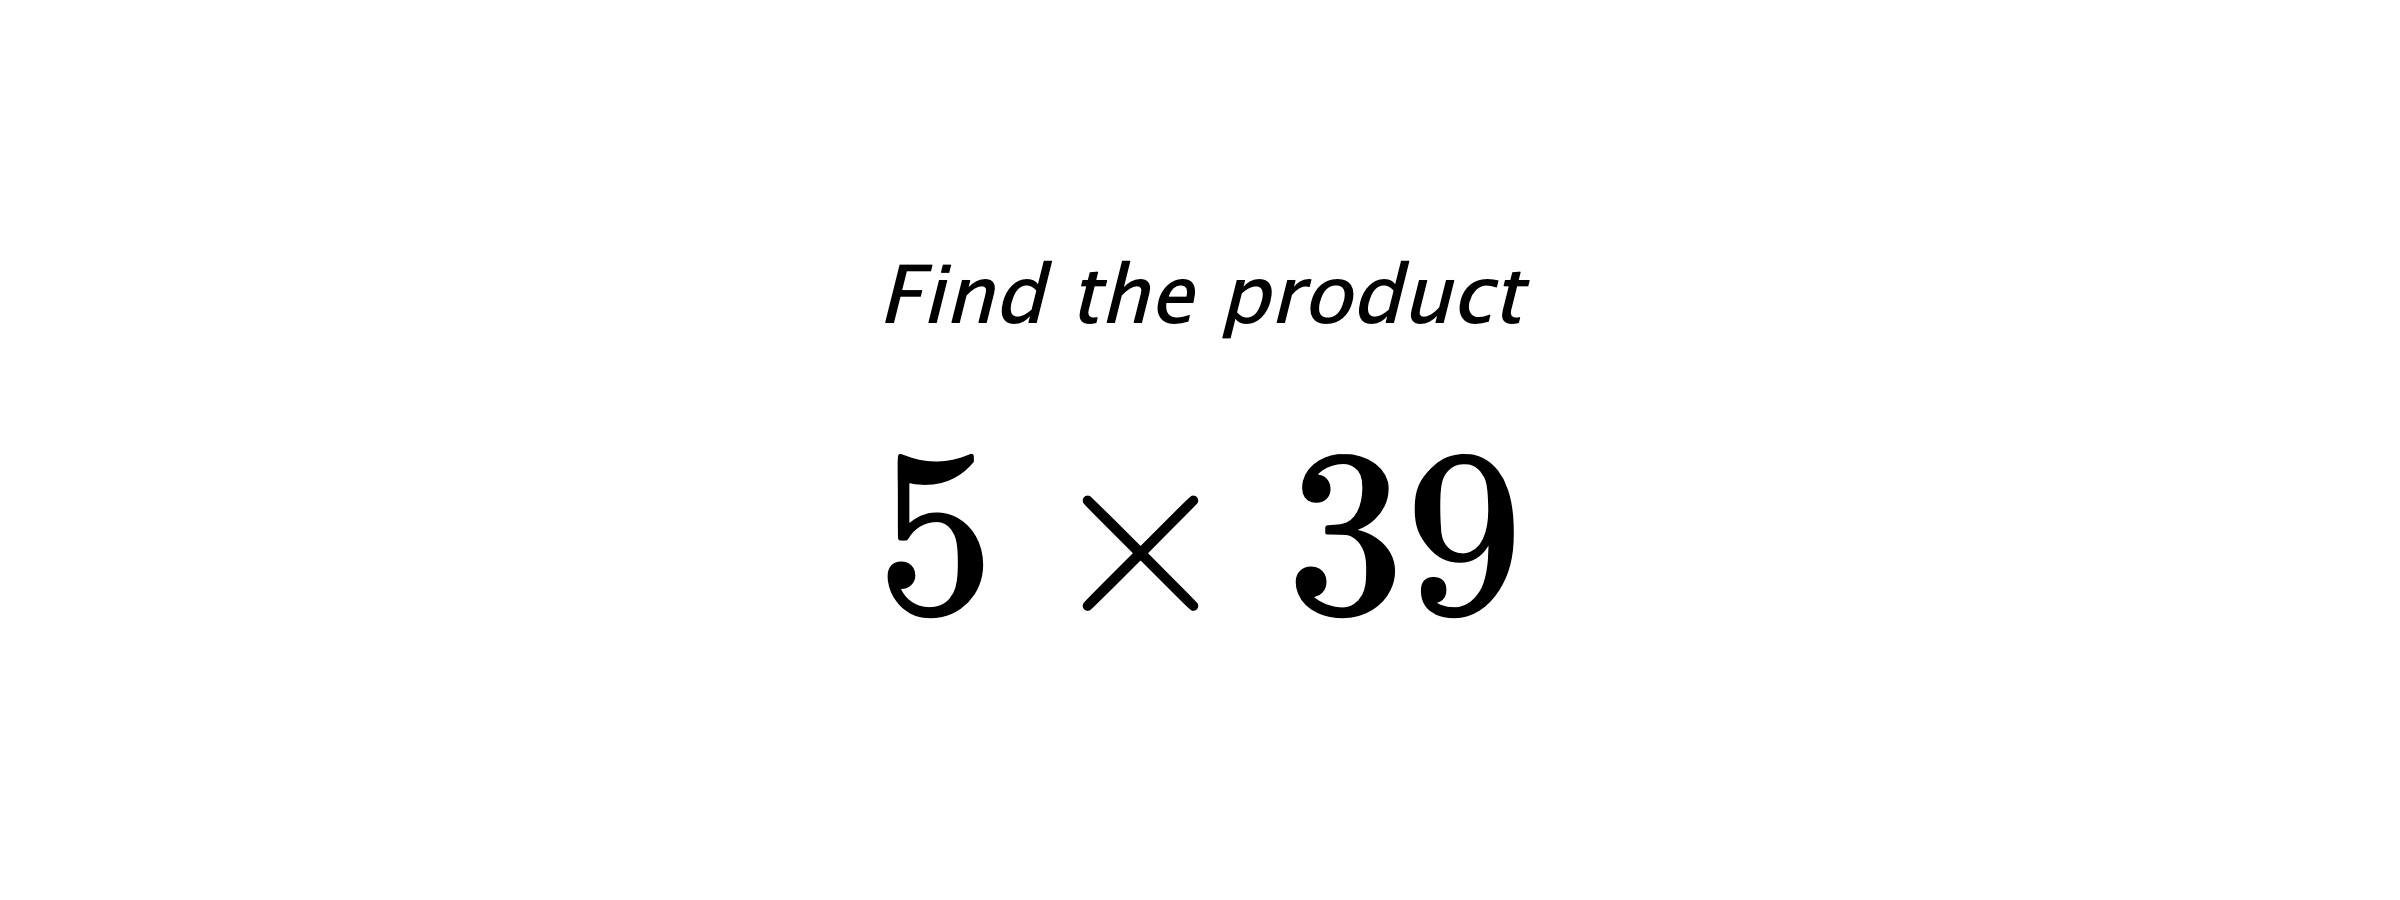 Find the product $ 5 \times 39 $